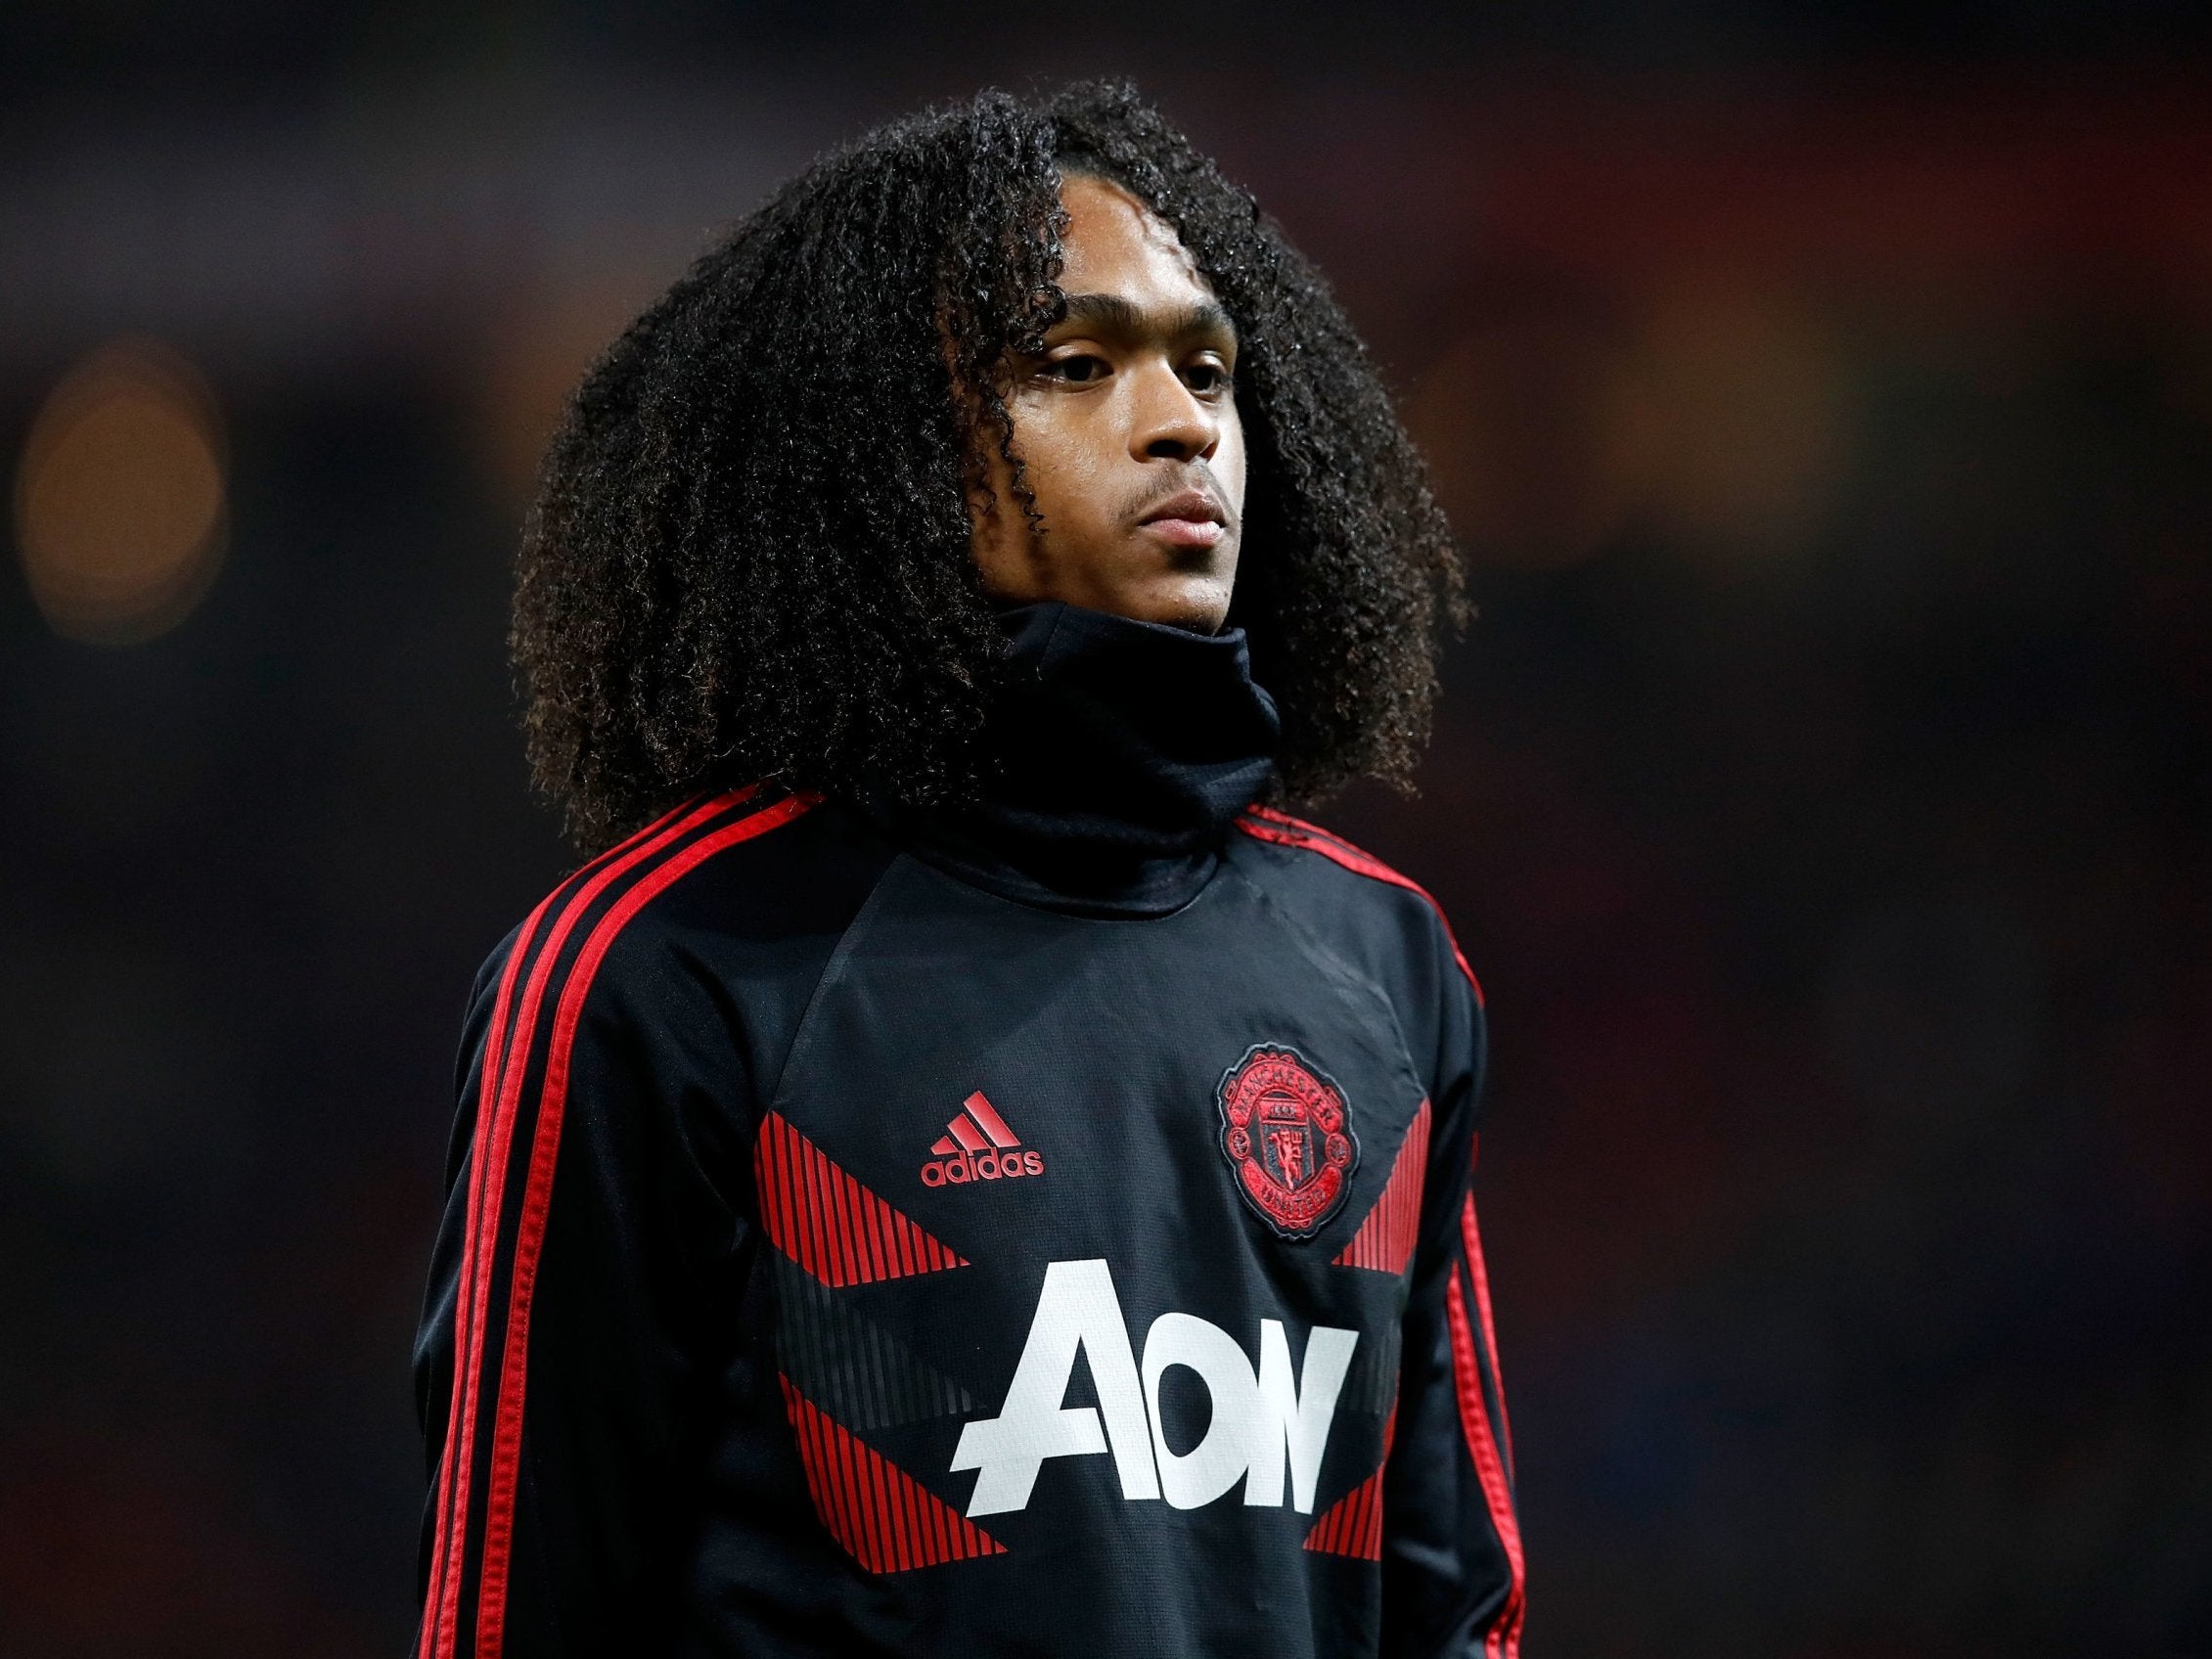 Mourinho bemoaned having 18-year-old Tahith Chong as his only attacking option